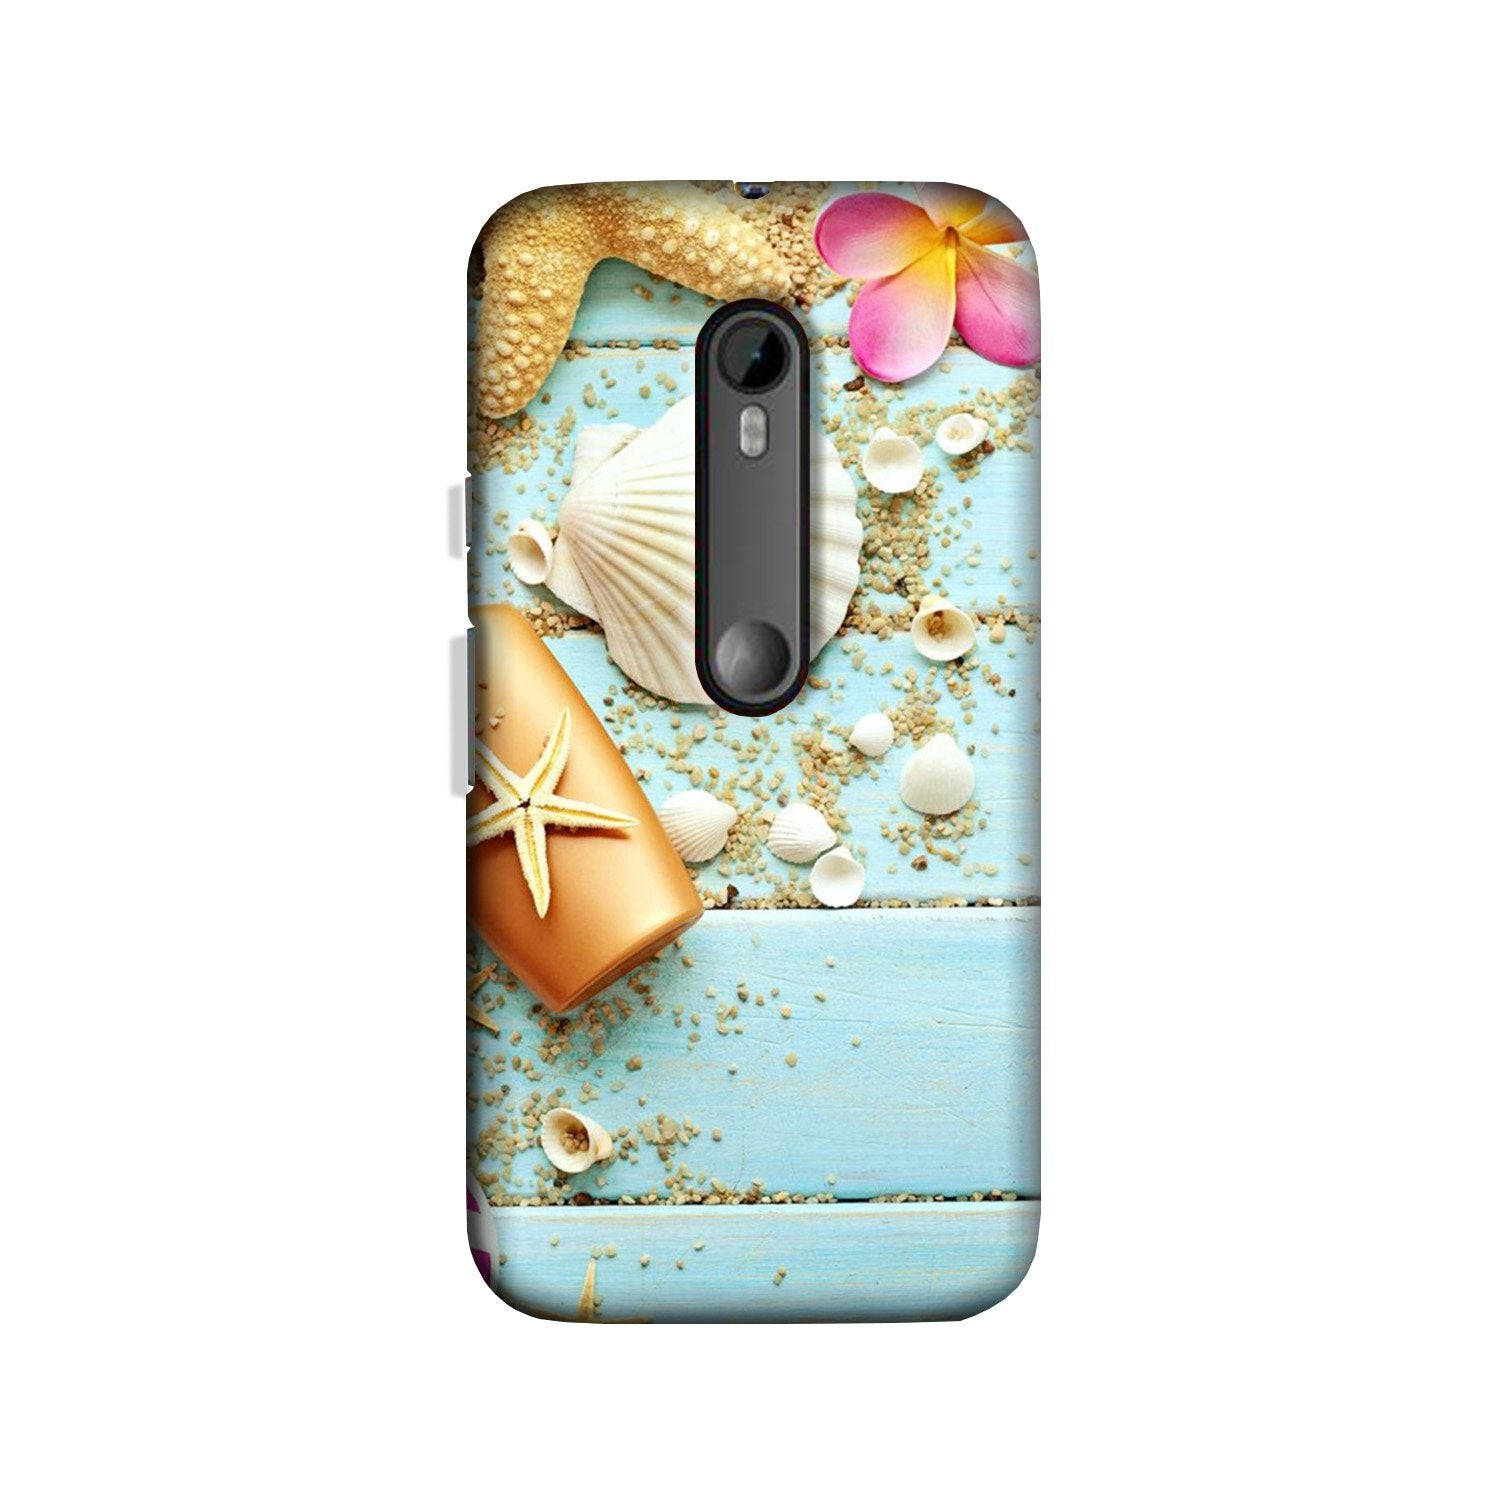 Sea Shells Case for Moto X Force